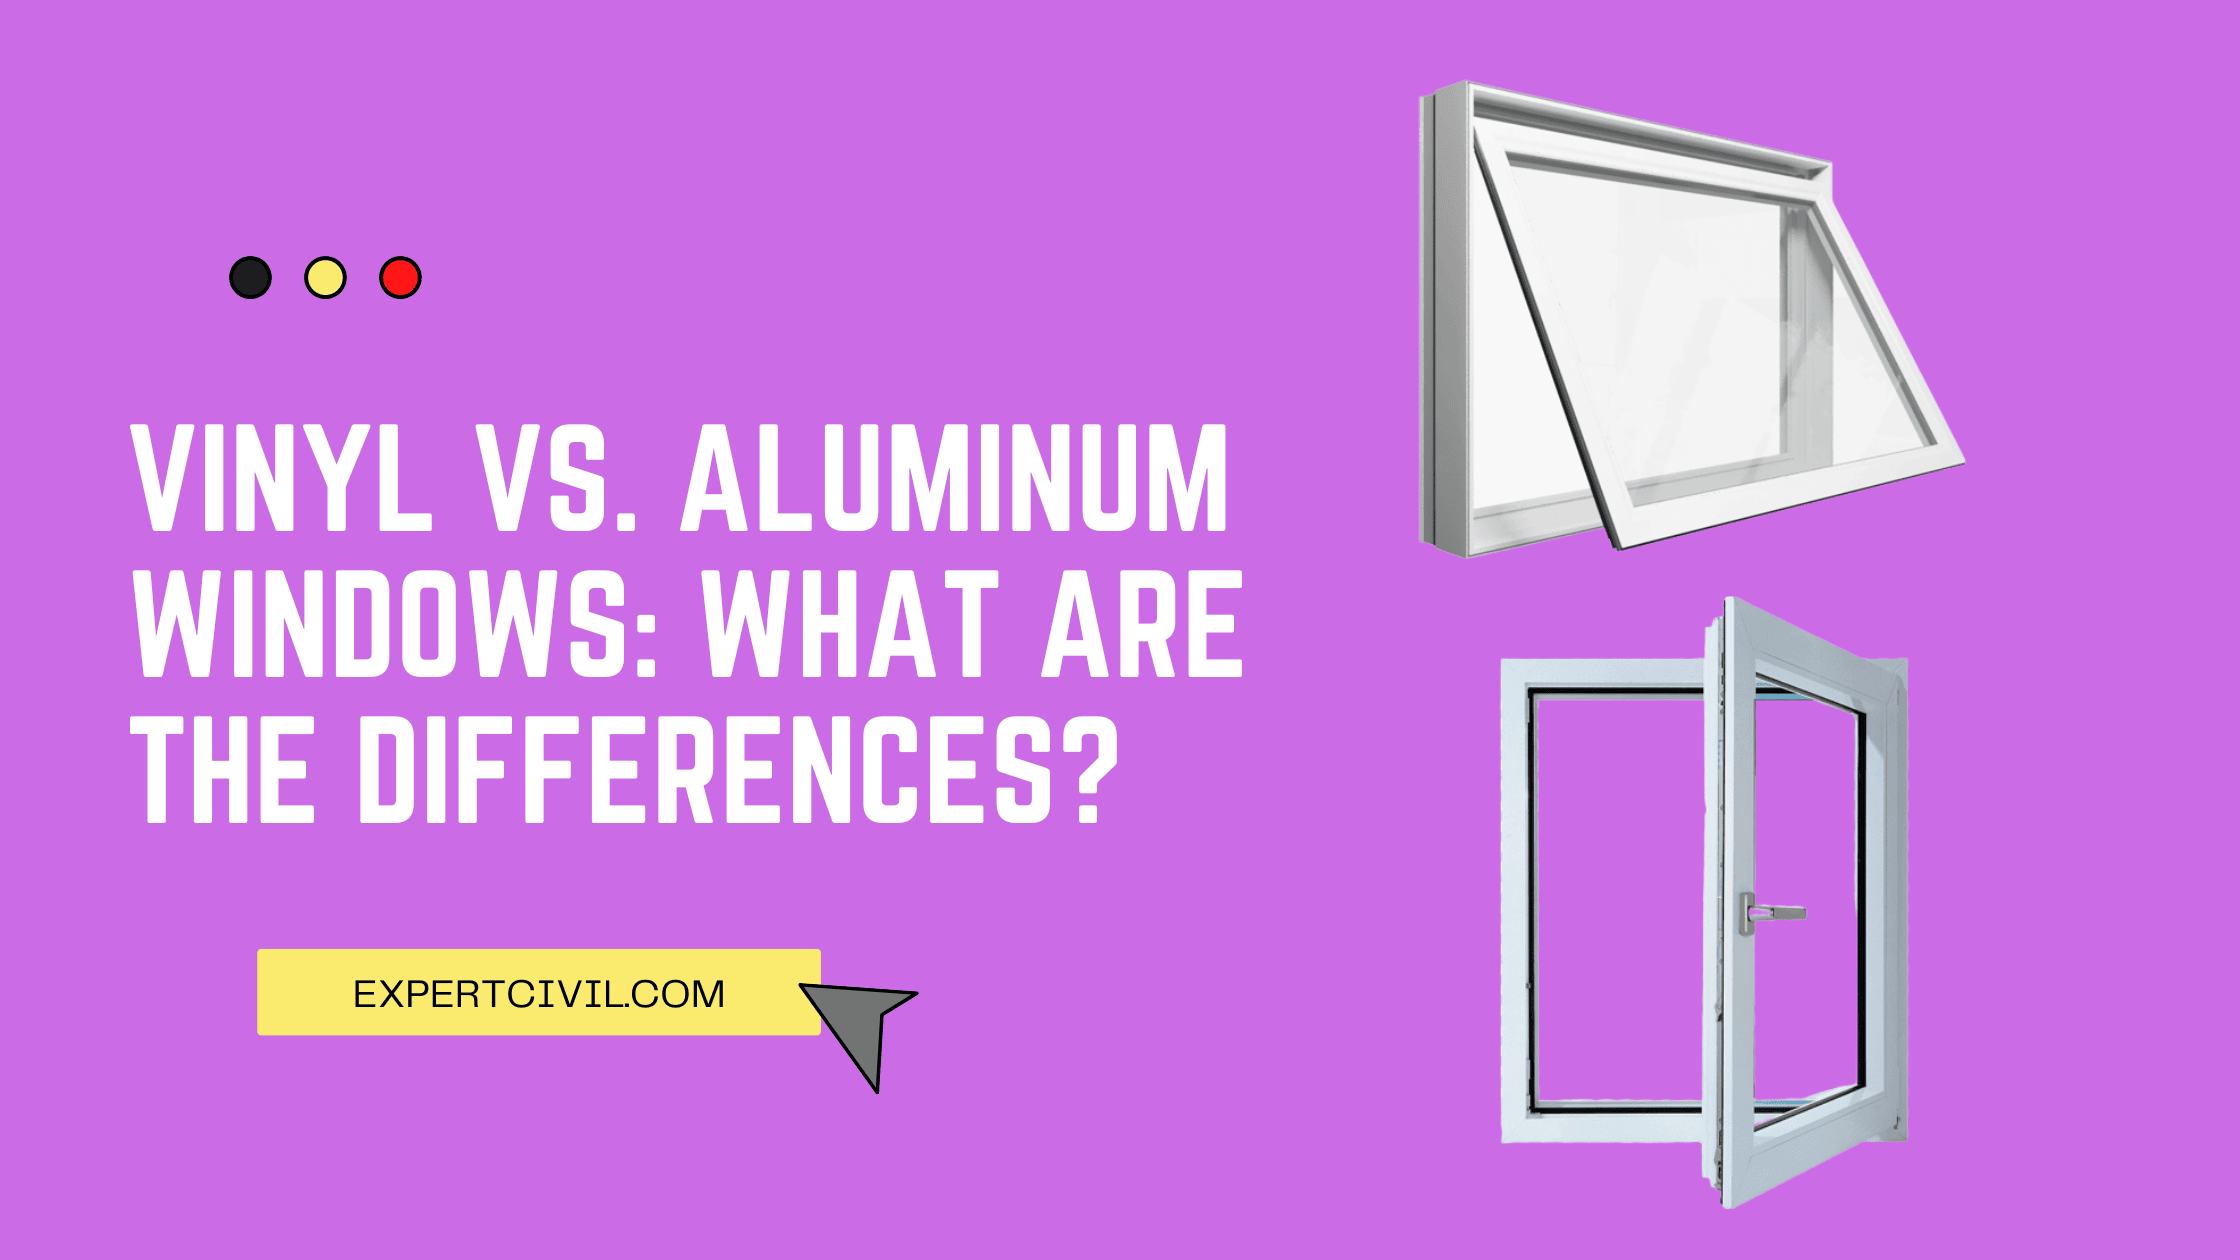 Vinyl vs. Aluminum Windows: What Are the Differences?